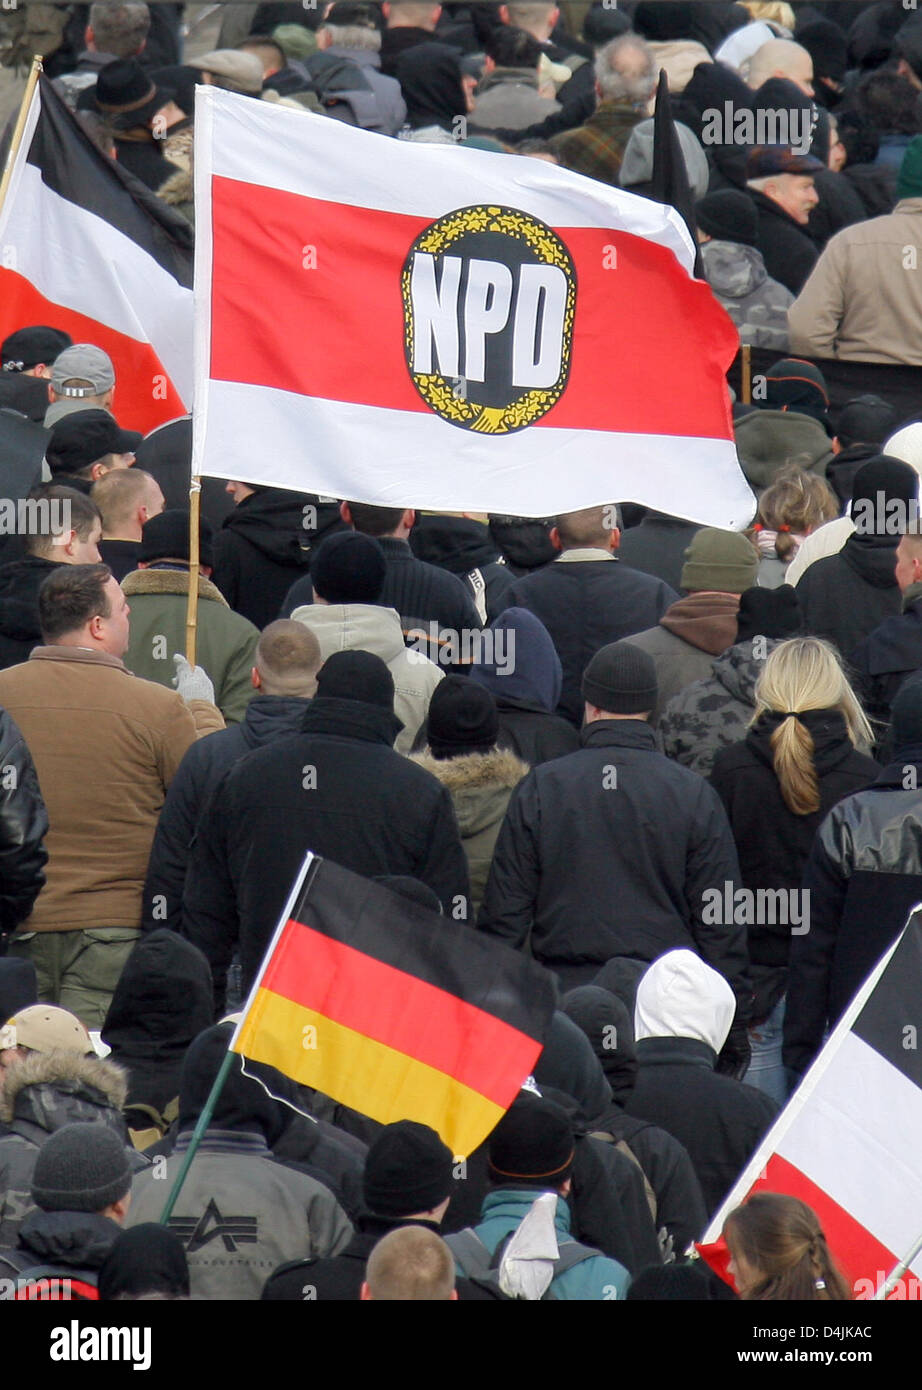 Rightist extremists march through Dresden, Germany, 14 February 2009. Far-right wing demonstrators traditionally provoke witha march  at the commemorations for the vicitims of the 1945 Dresden bombings. The date marks the 64th anniversary of the vast bombings on Dresden  conducted by allied forces to the end of World War II in 1945. Approximately 25,000 people died in the fires. Ph Stock Photo